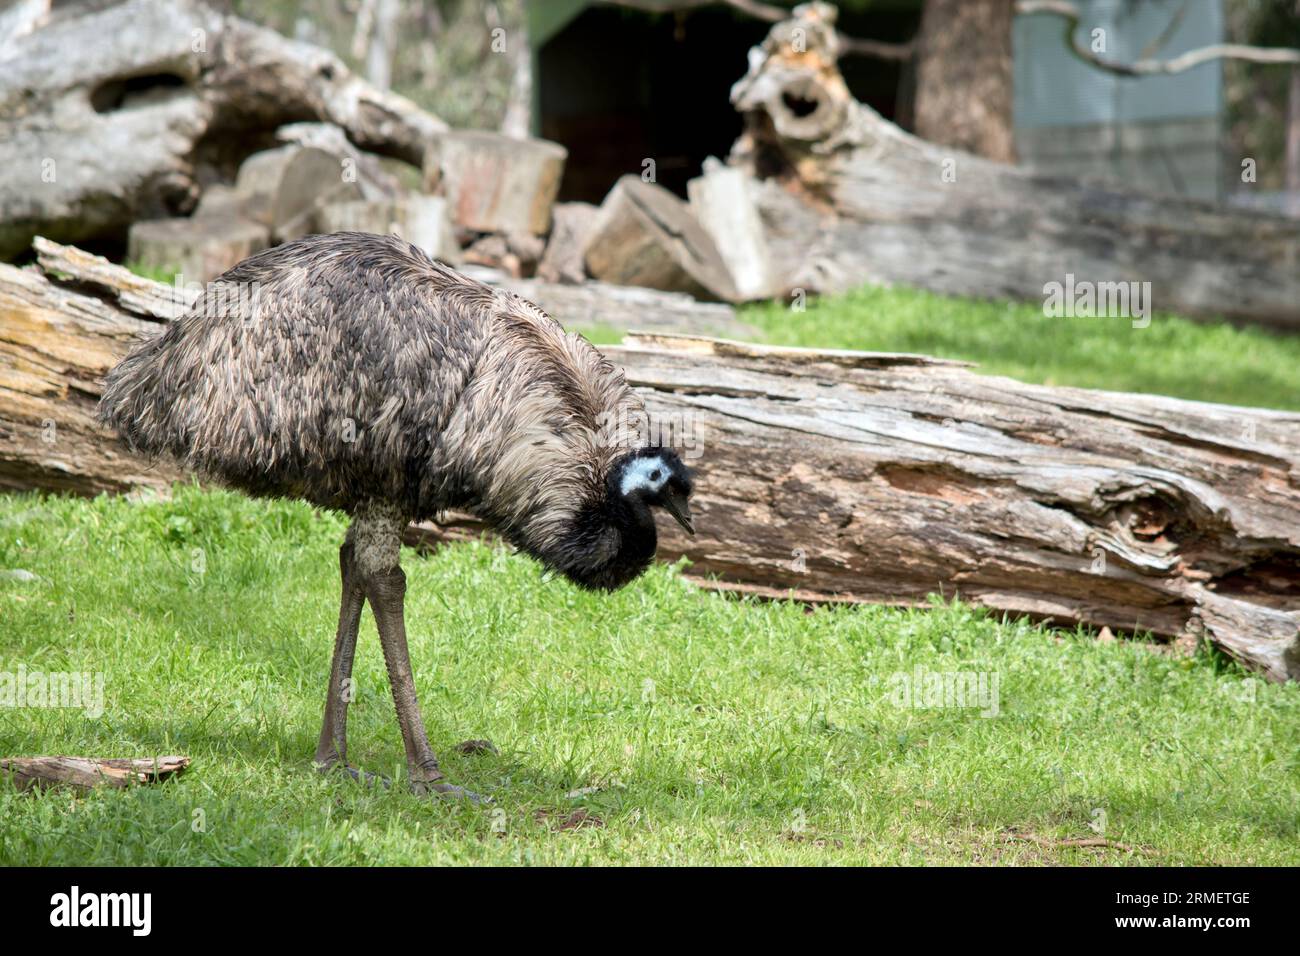 The Australian emu is eating grass  in a field Stock Photo